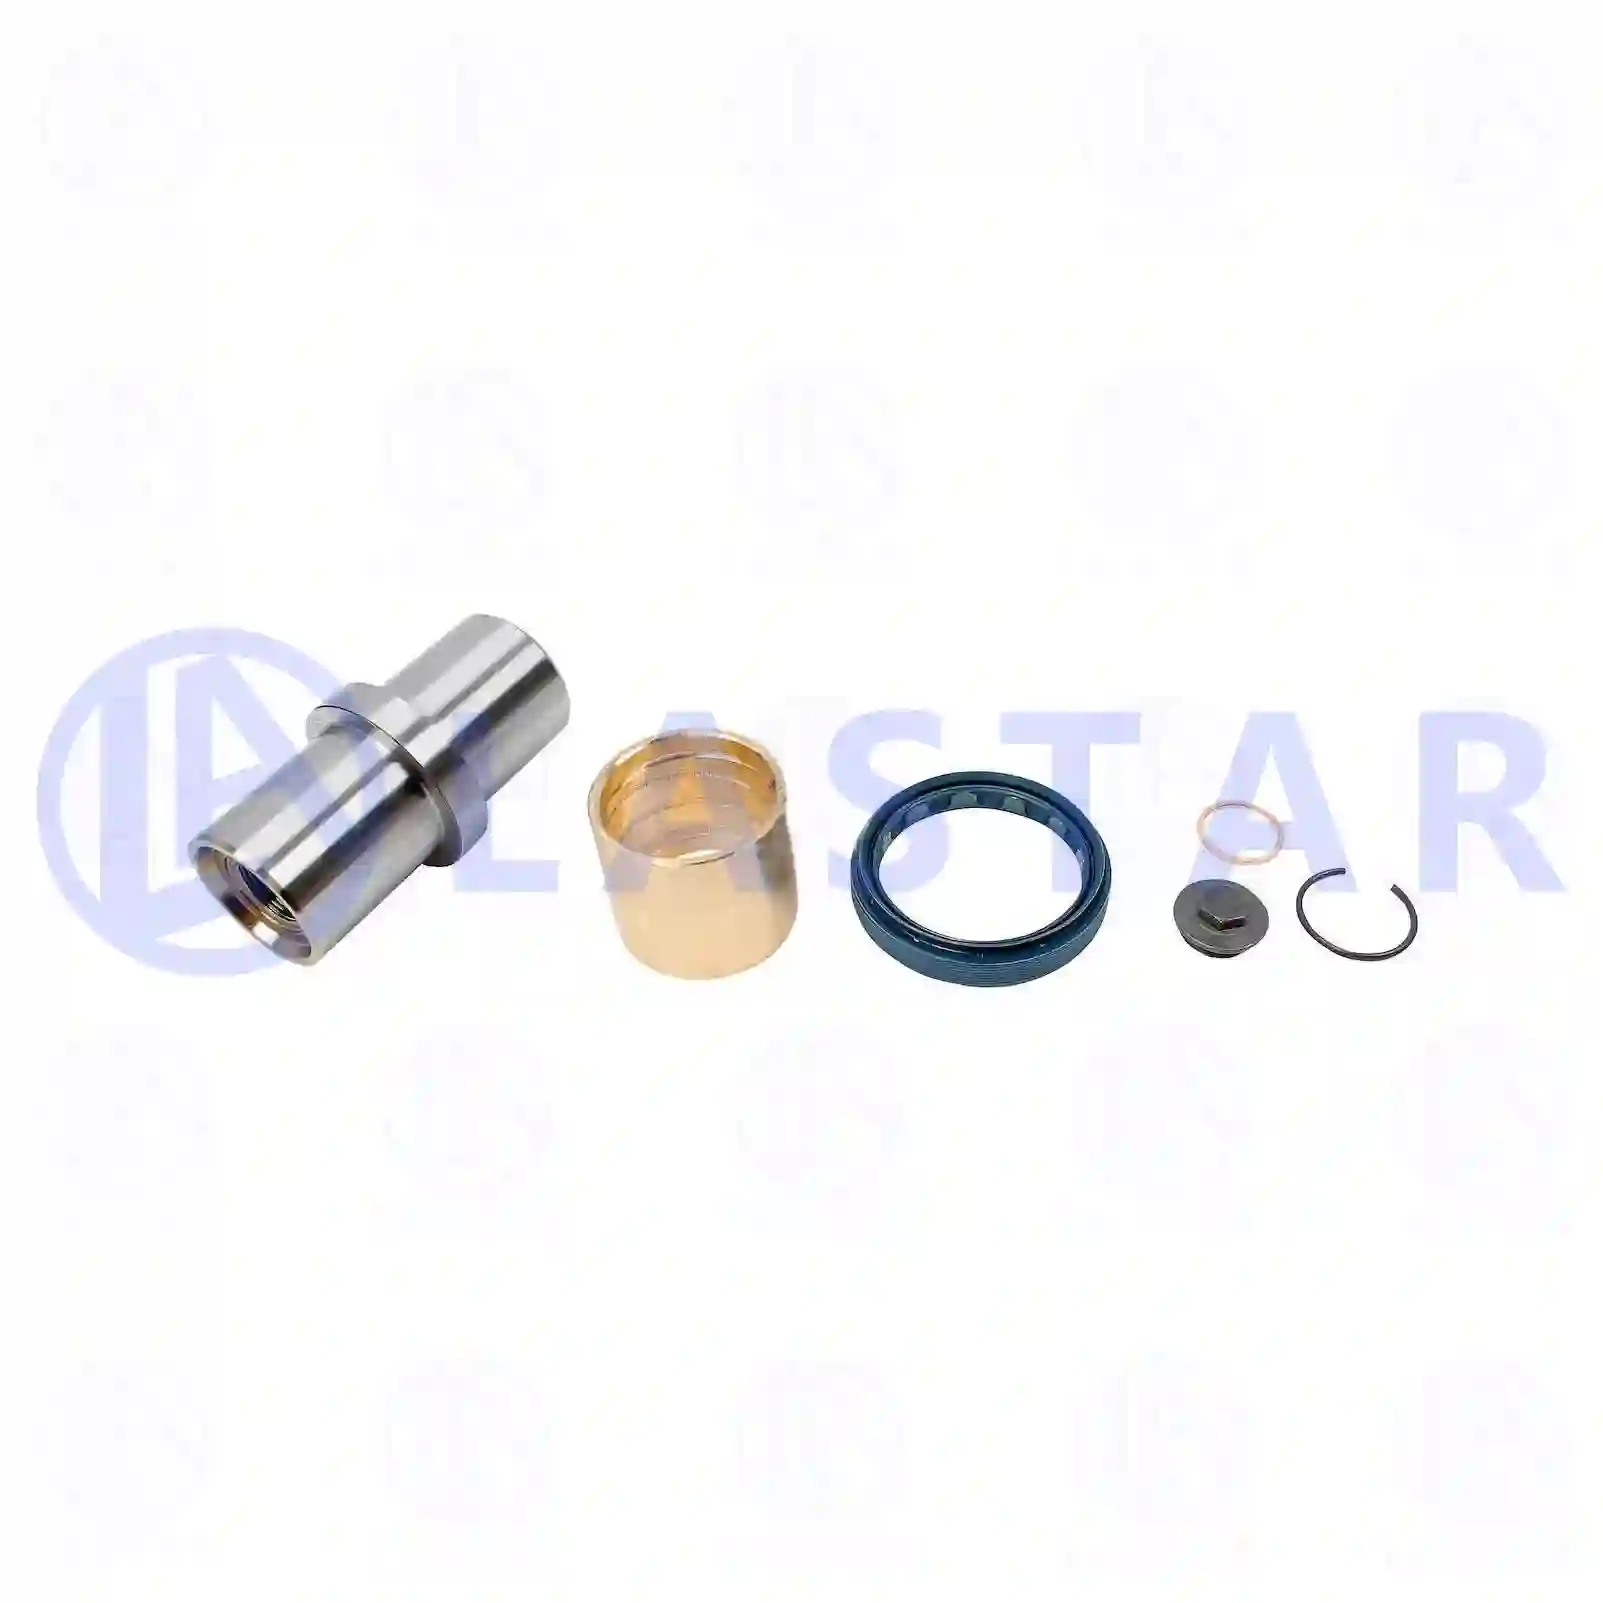 King pin kit, 77730536, 81363050016S, 81363050016S1, 3463300119, 3465860133 ||  77730536 Lastar Spare Part | Truck Spare Parts, Auotomotive Spare Parts King pin kit, 77730536, 81363050016S, 81363050016S1, 3463300119, 3465860133 ||  77730536 Lastar Spare Part | Truck Spare Parts, Auotomotive Spare Parts